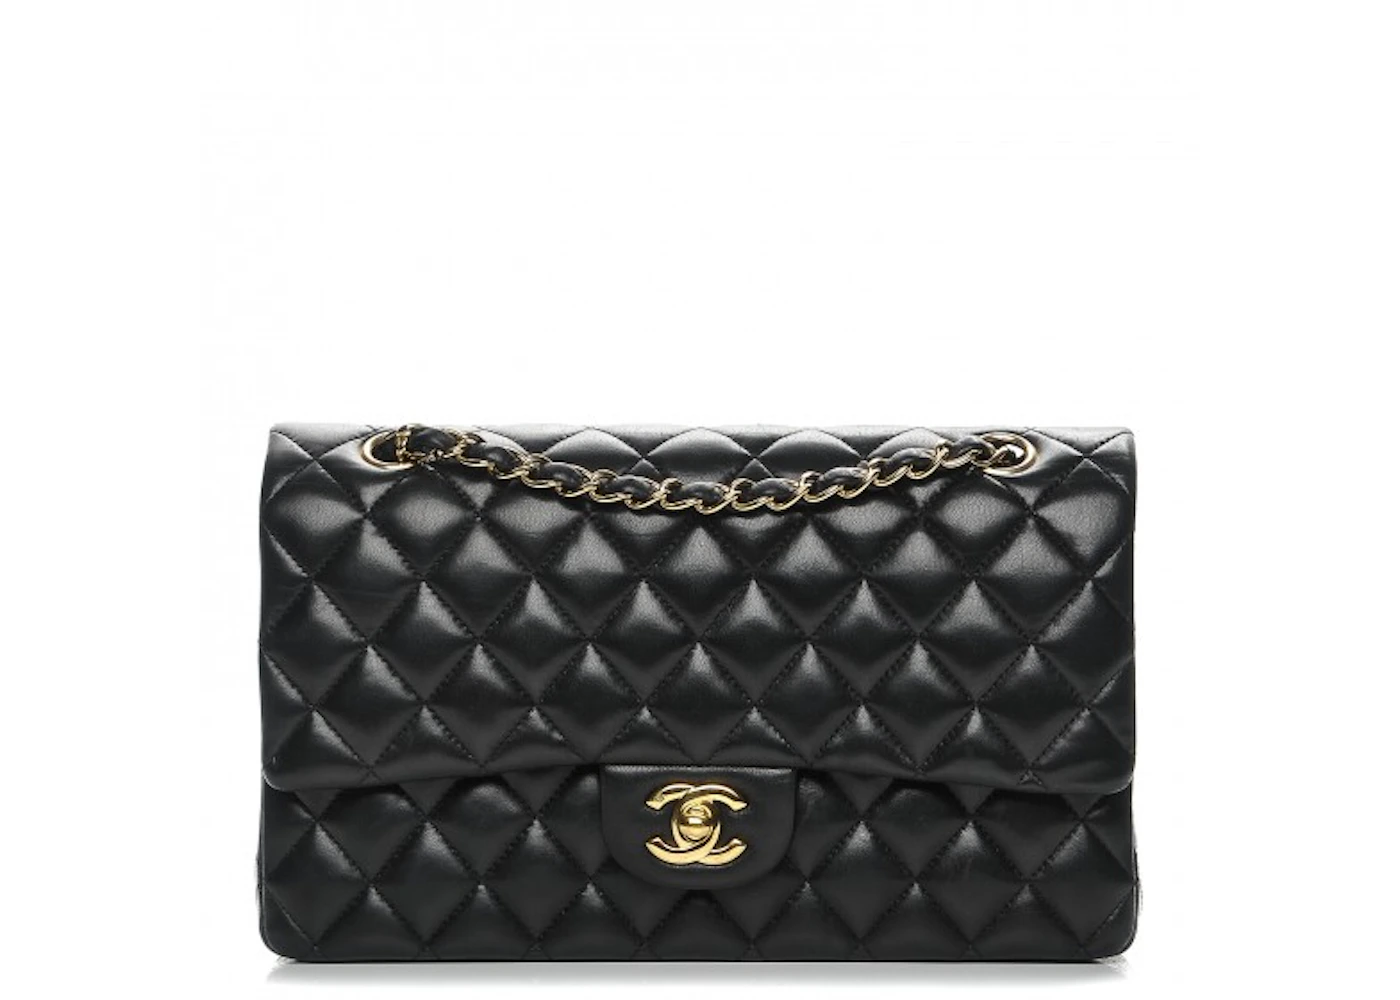 chanel gold and black bag